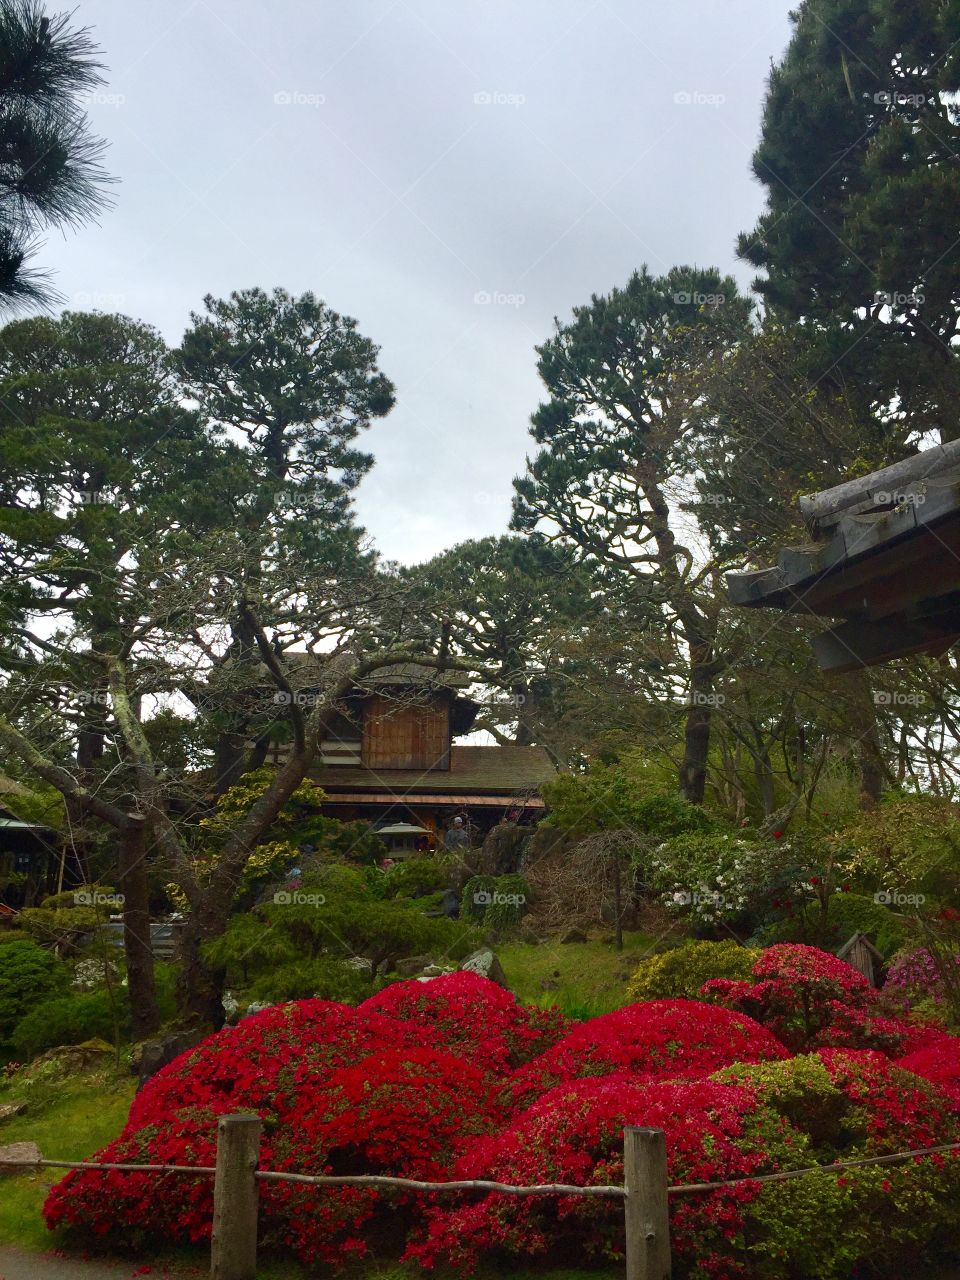 A must see Japanese Gardens in San Francisco